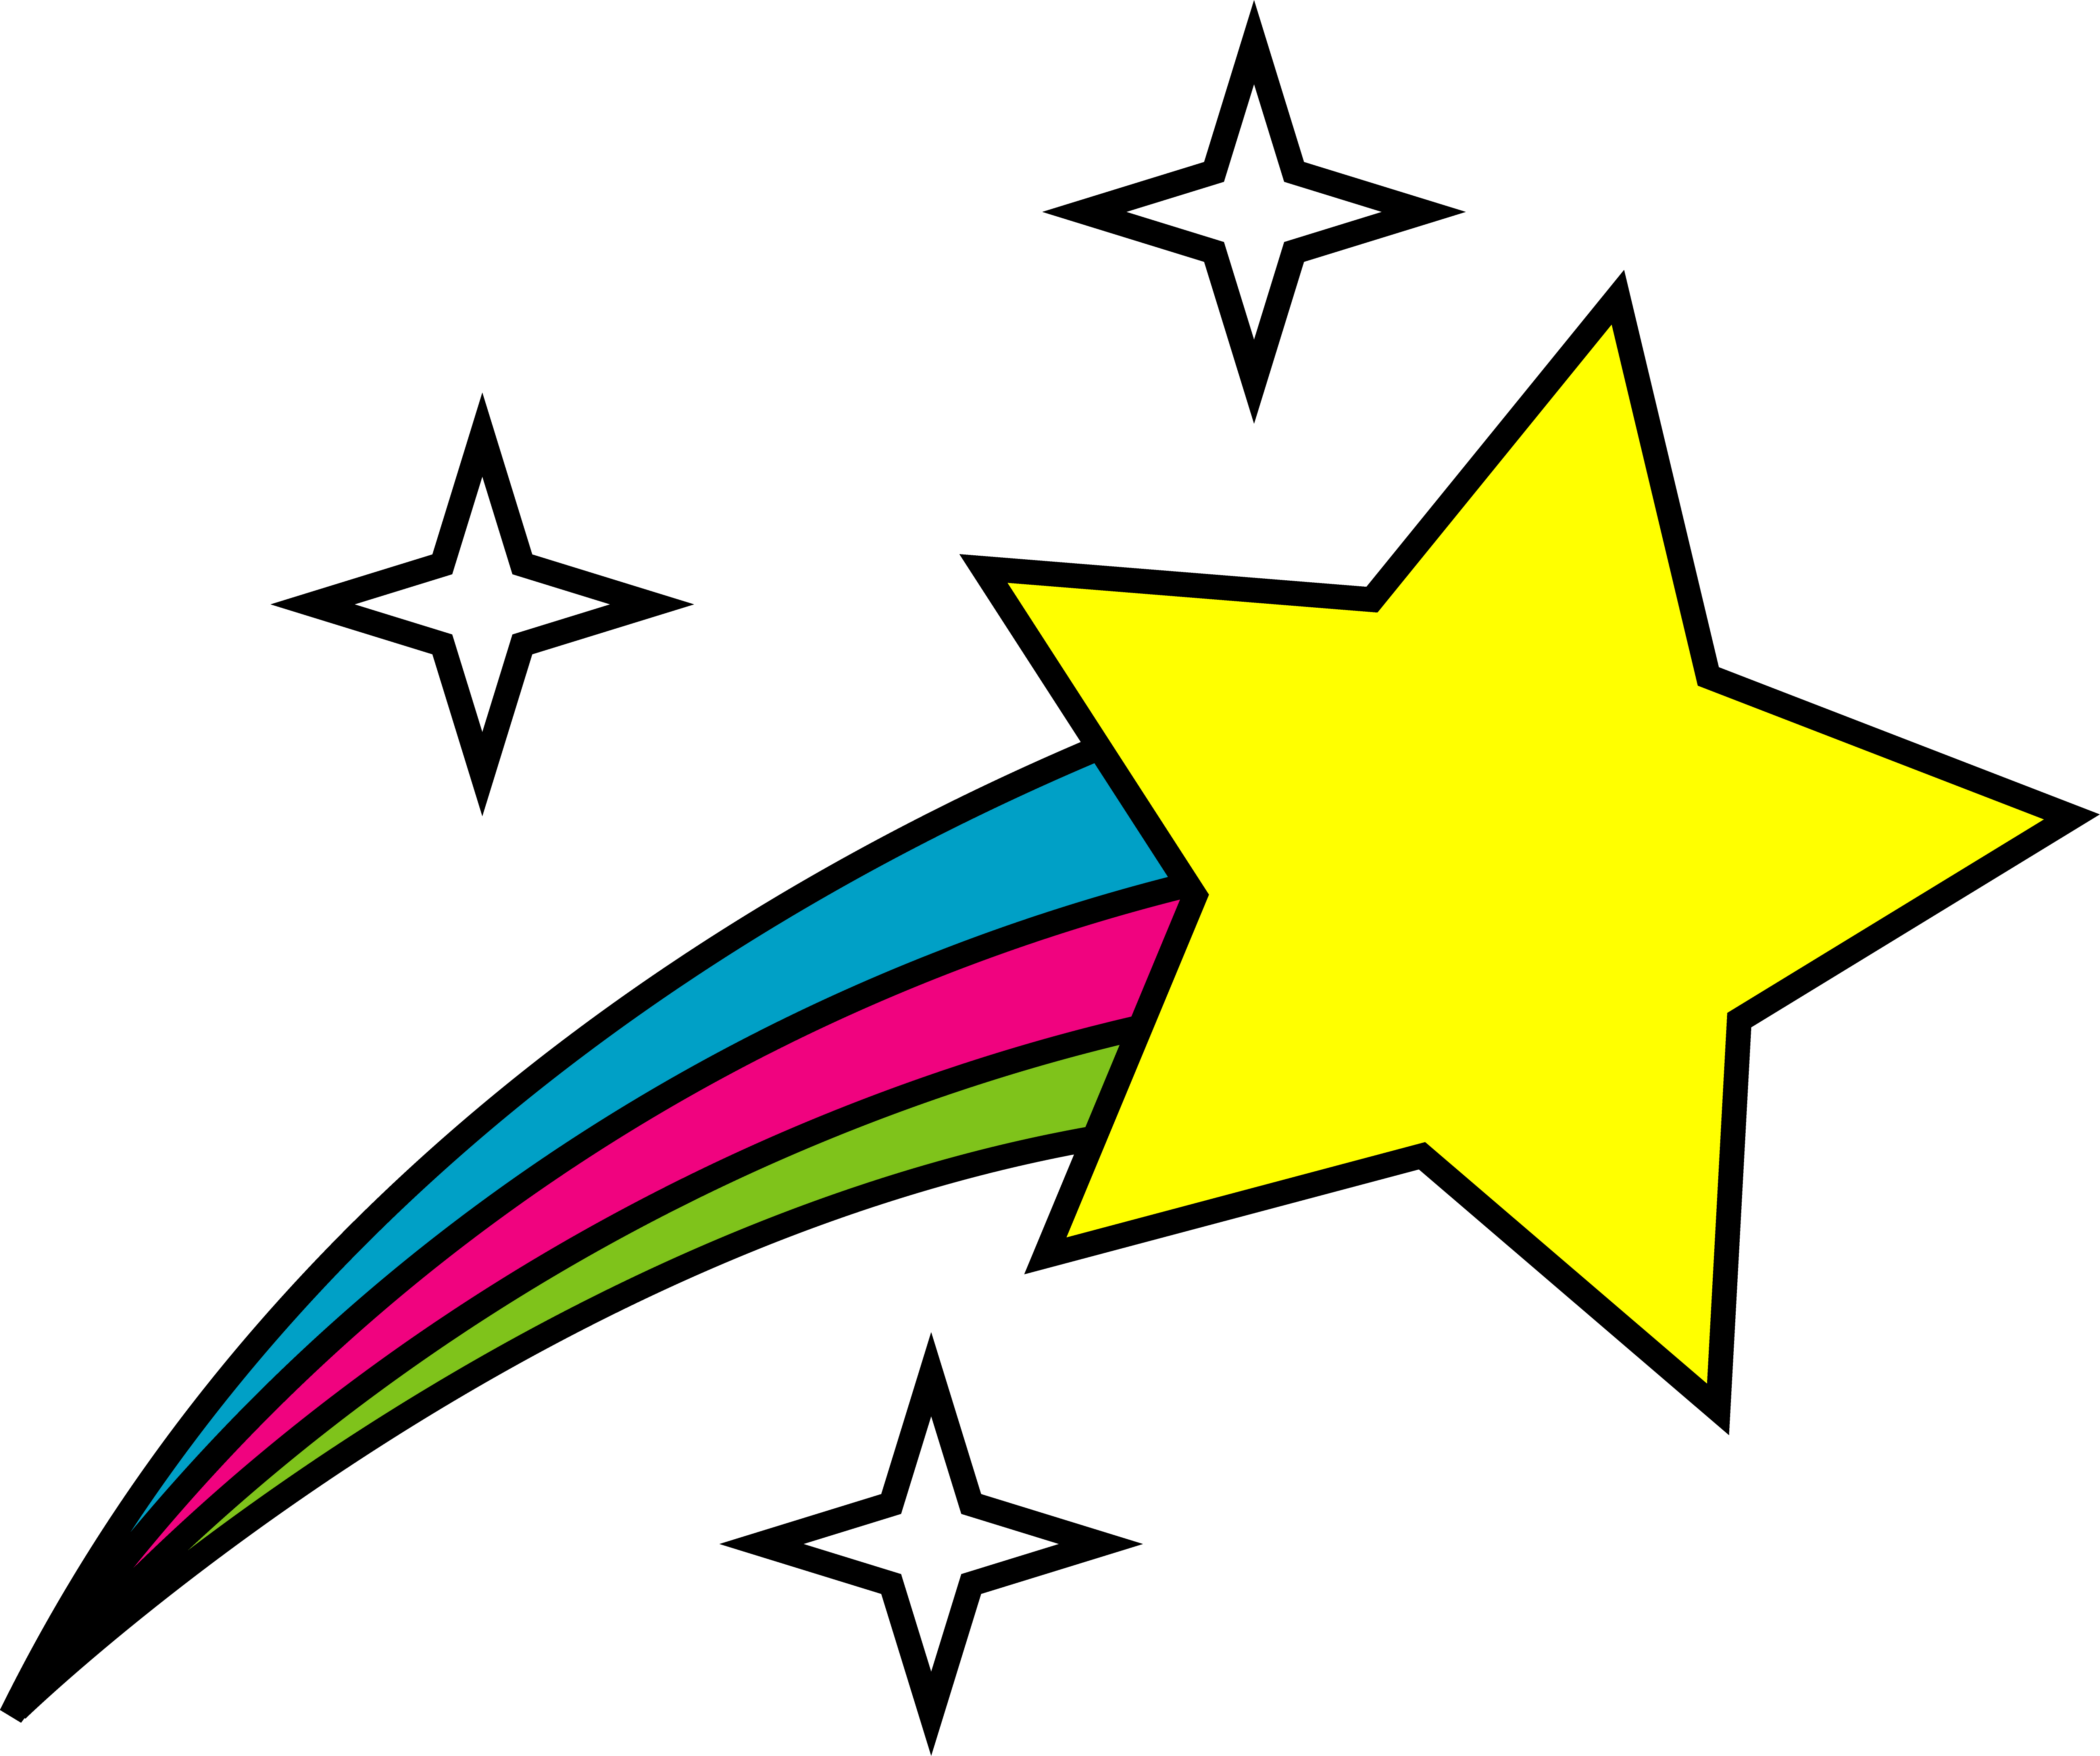 Stars Clip Art For Kids | Clipart library - Free Clipart Images